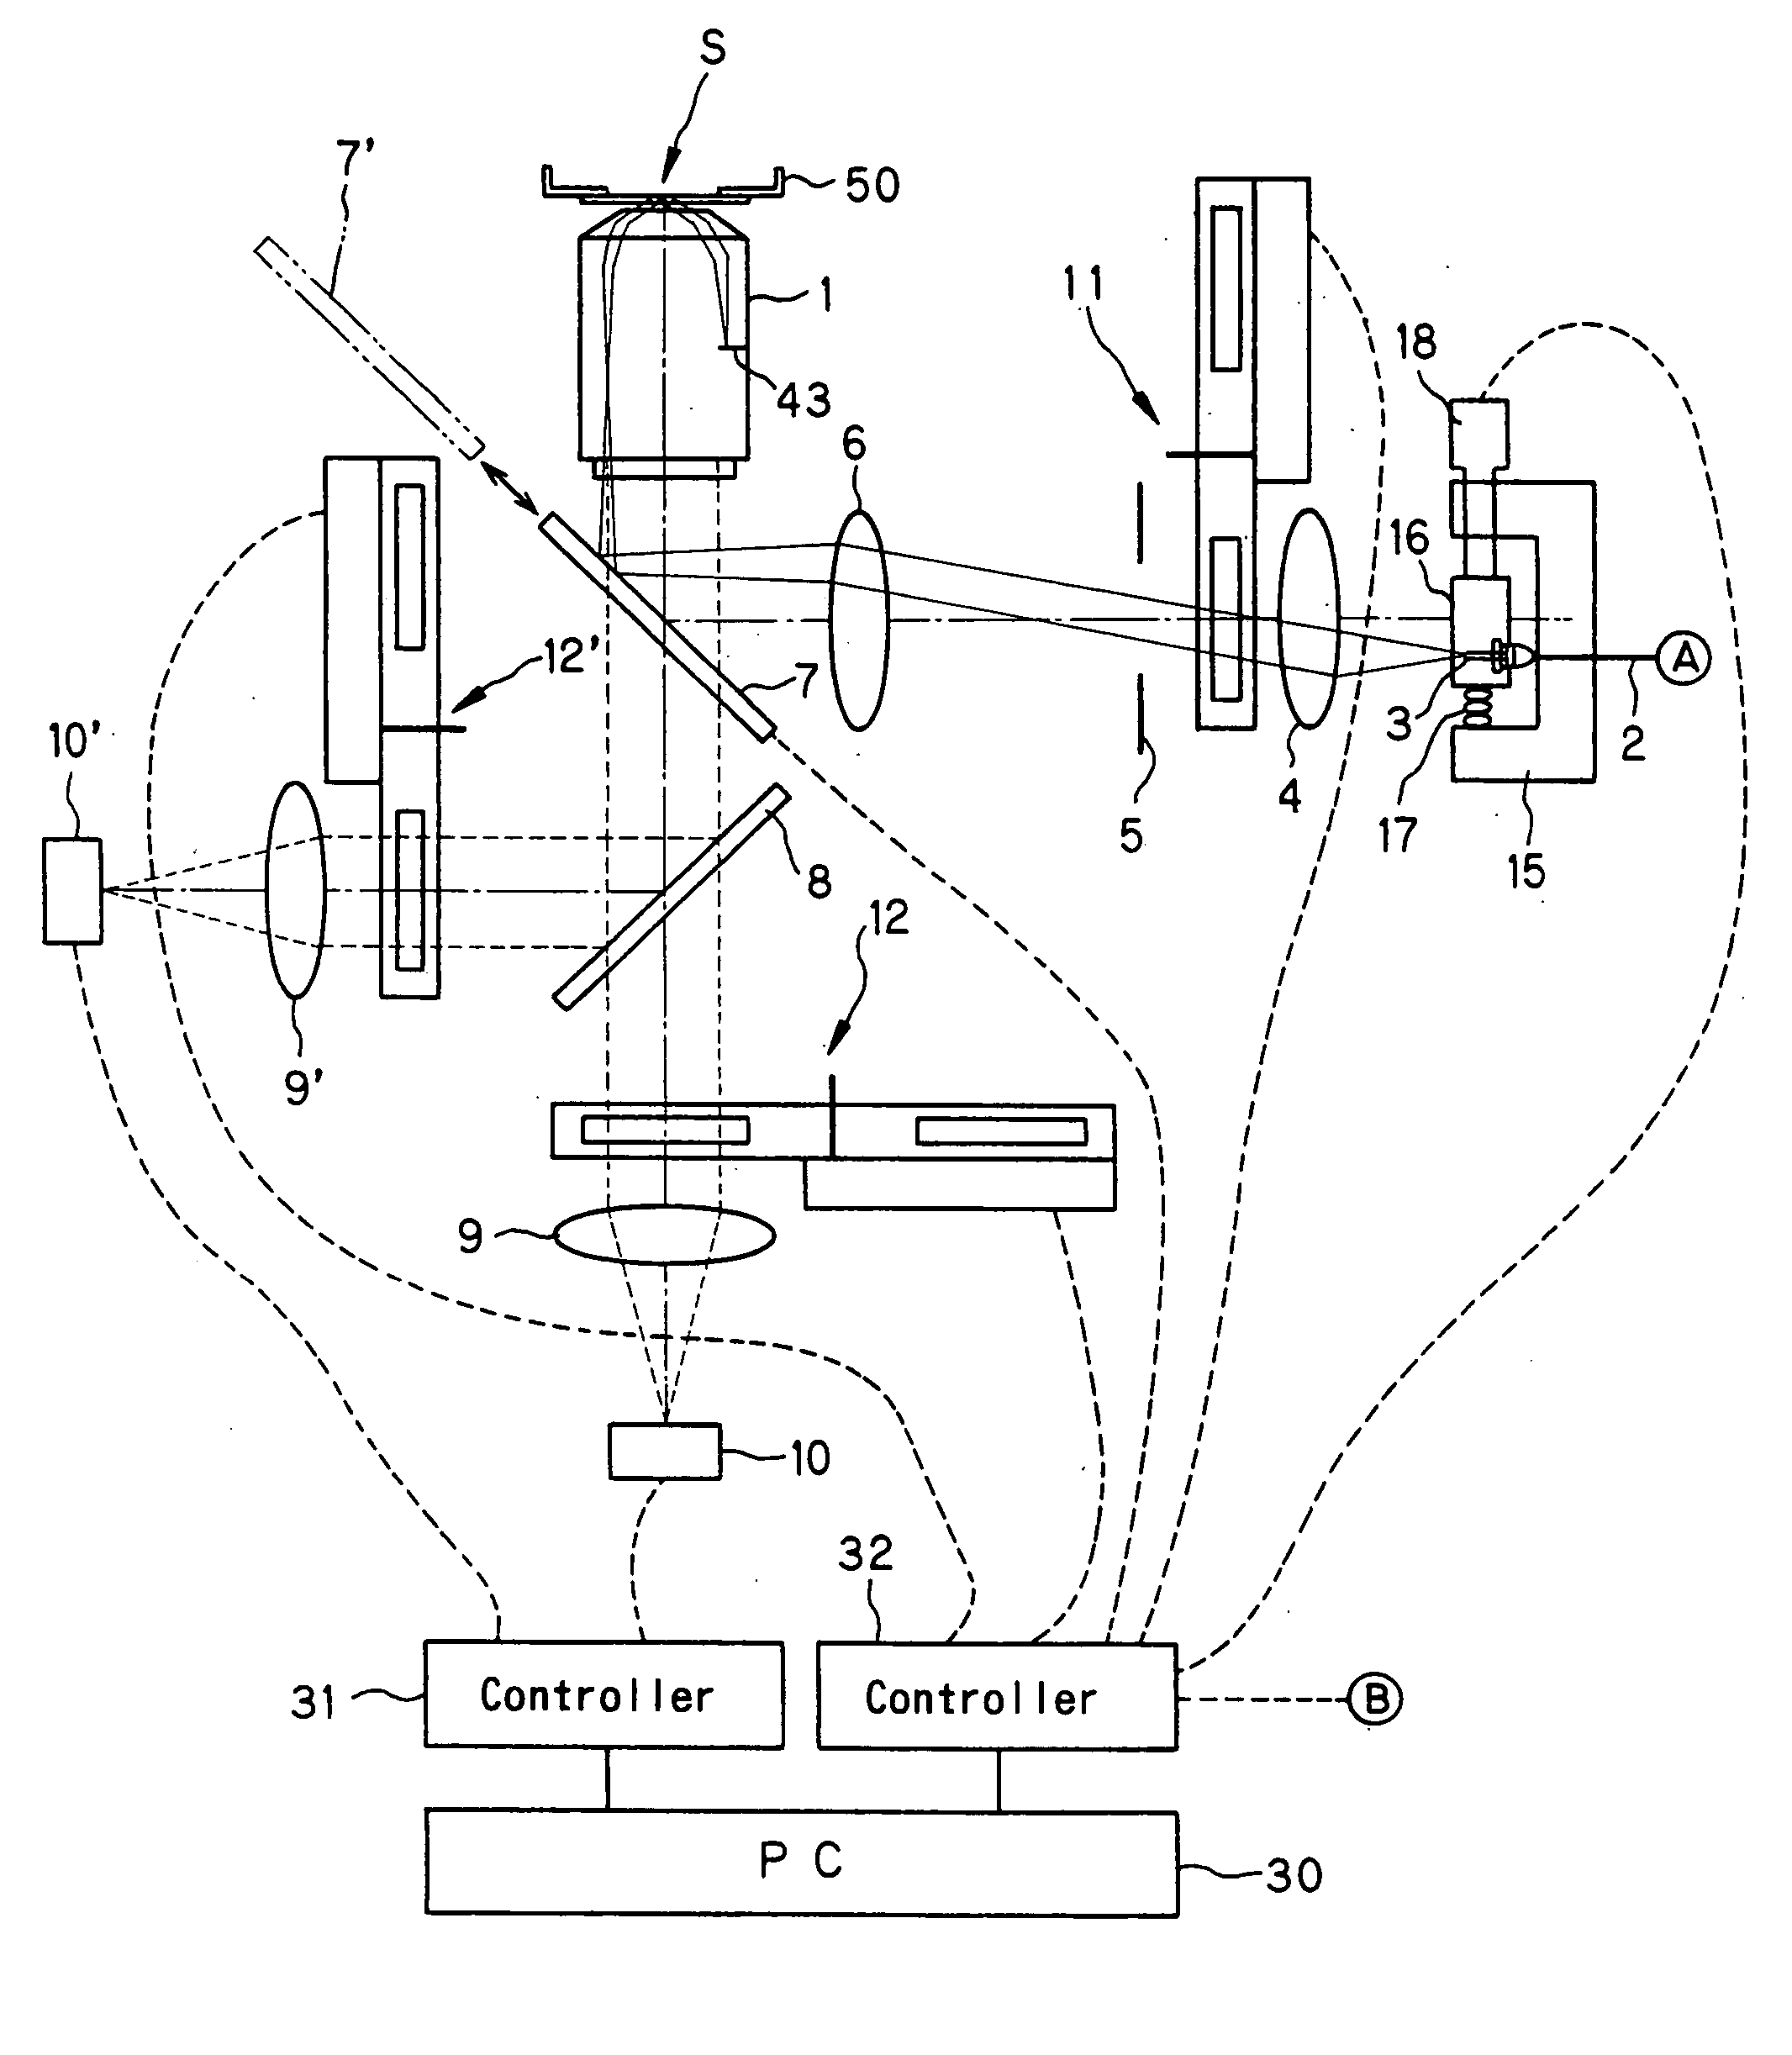 Microscope switchable between observation modes